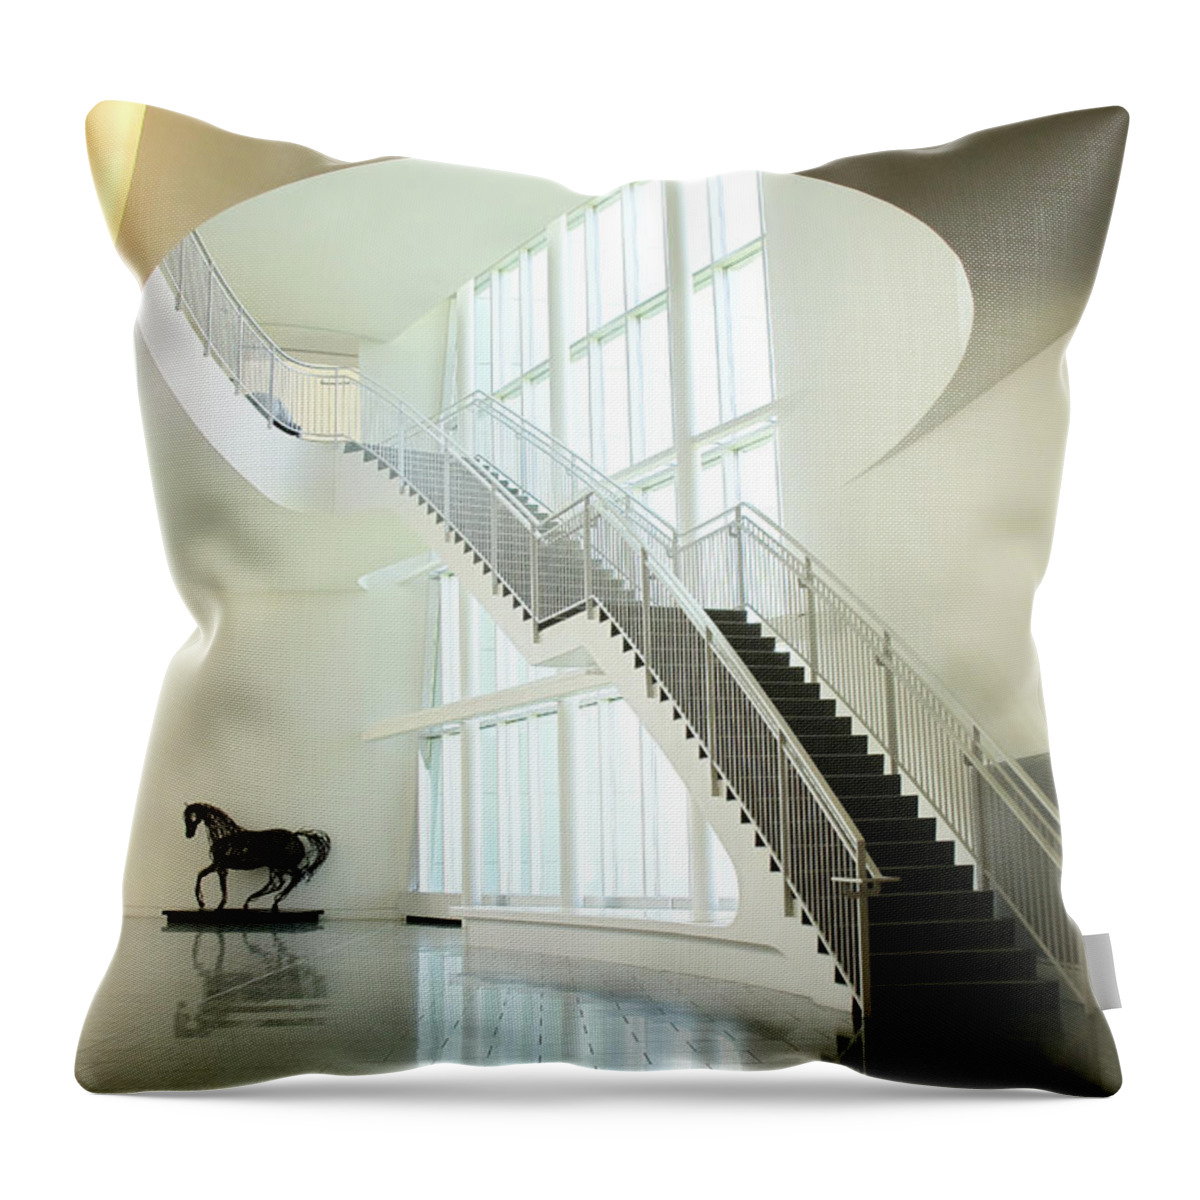 Architecture Throw Pillow featuring the photograph Stairway To Heaven by Jo Ann Tomaselli